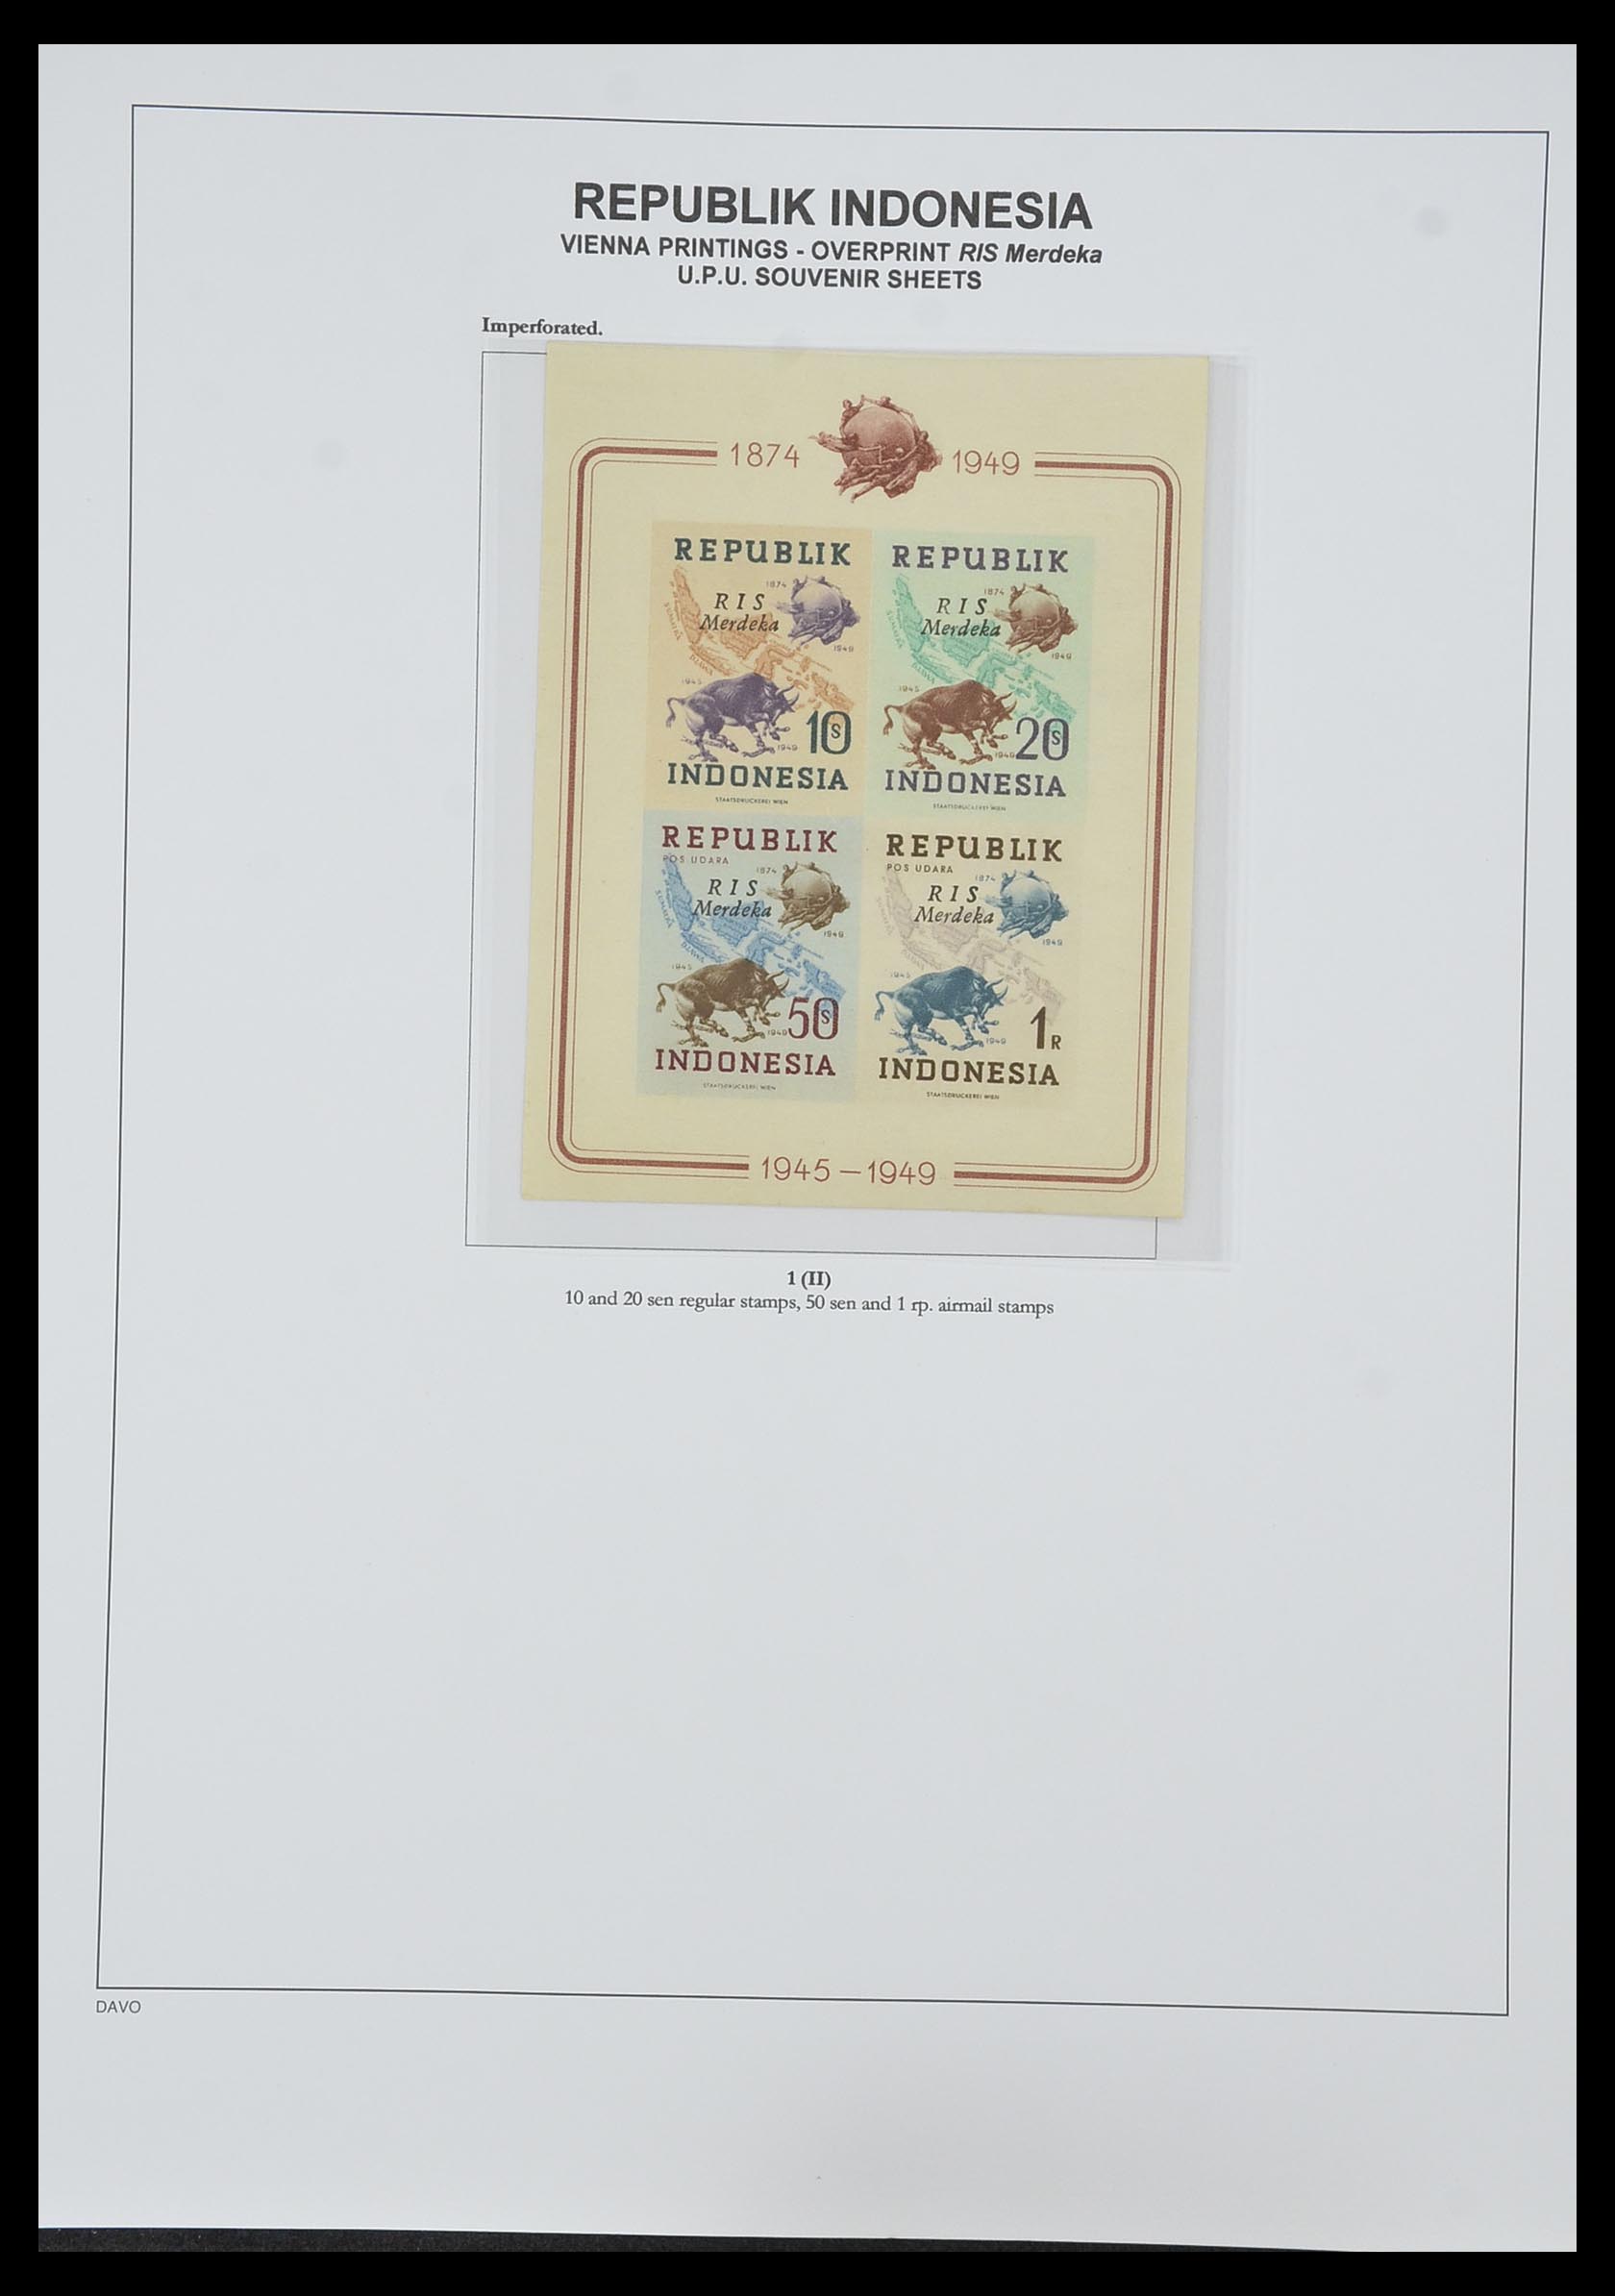 33988 053 - Stamp collection 33988 Vienna printings Indonesia.